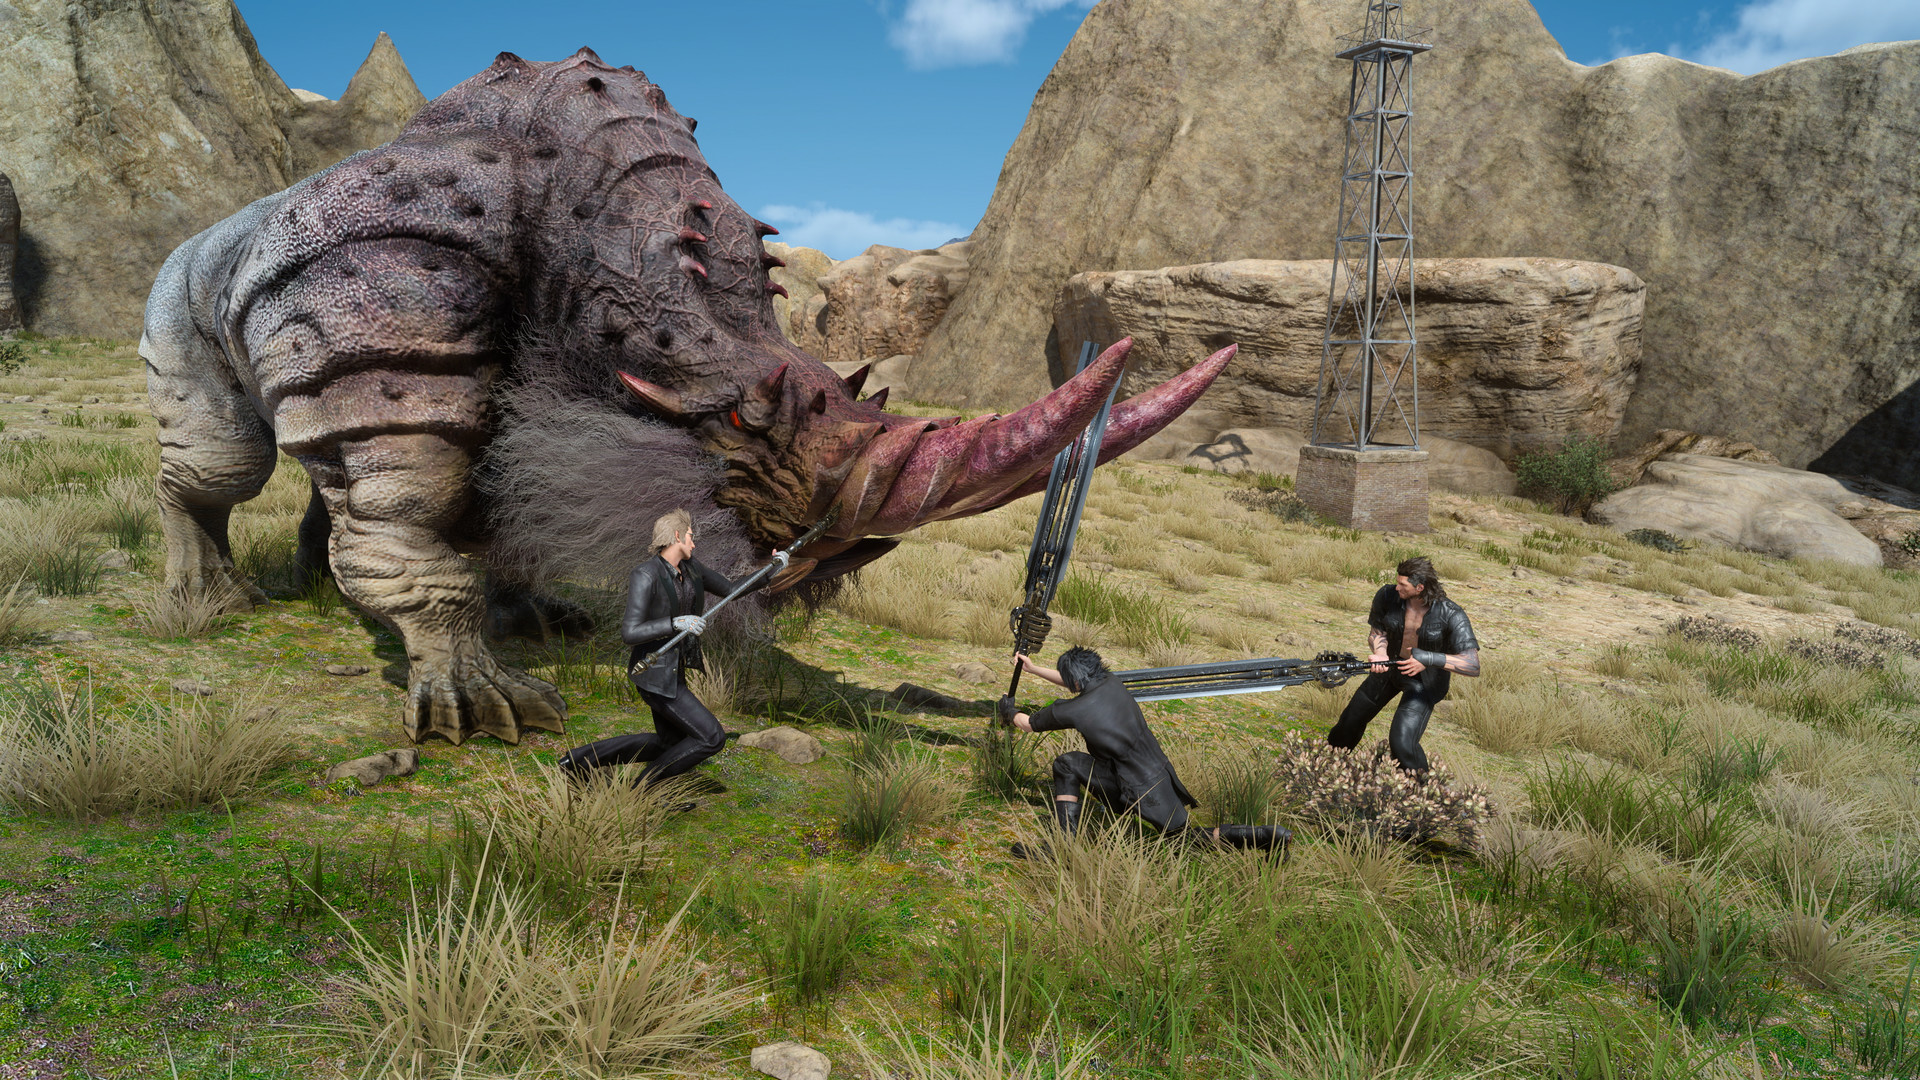 for iphone instal FINAL FANTASY XV WINDOWS EDITION Playable Demo free